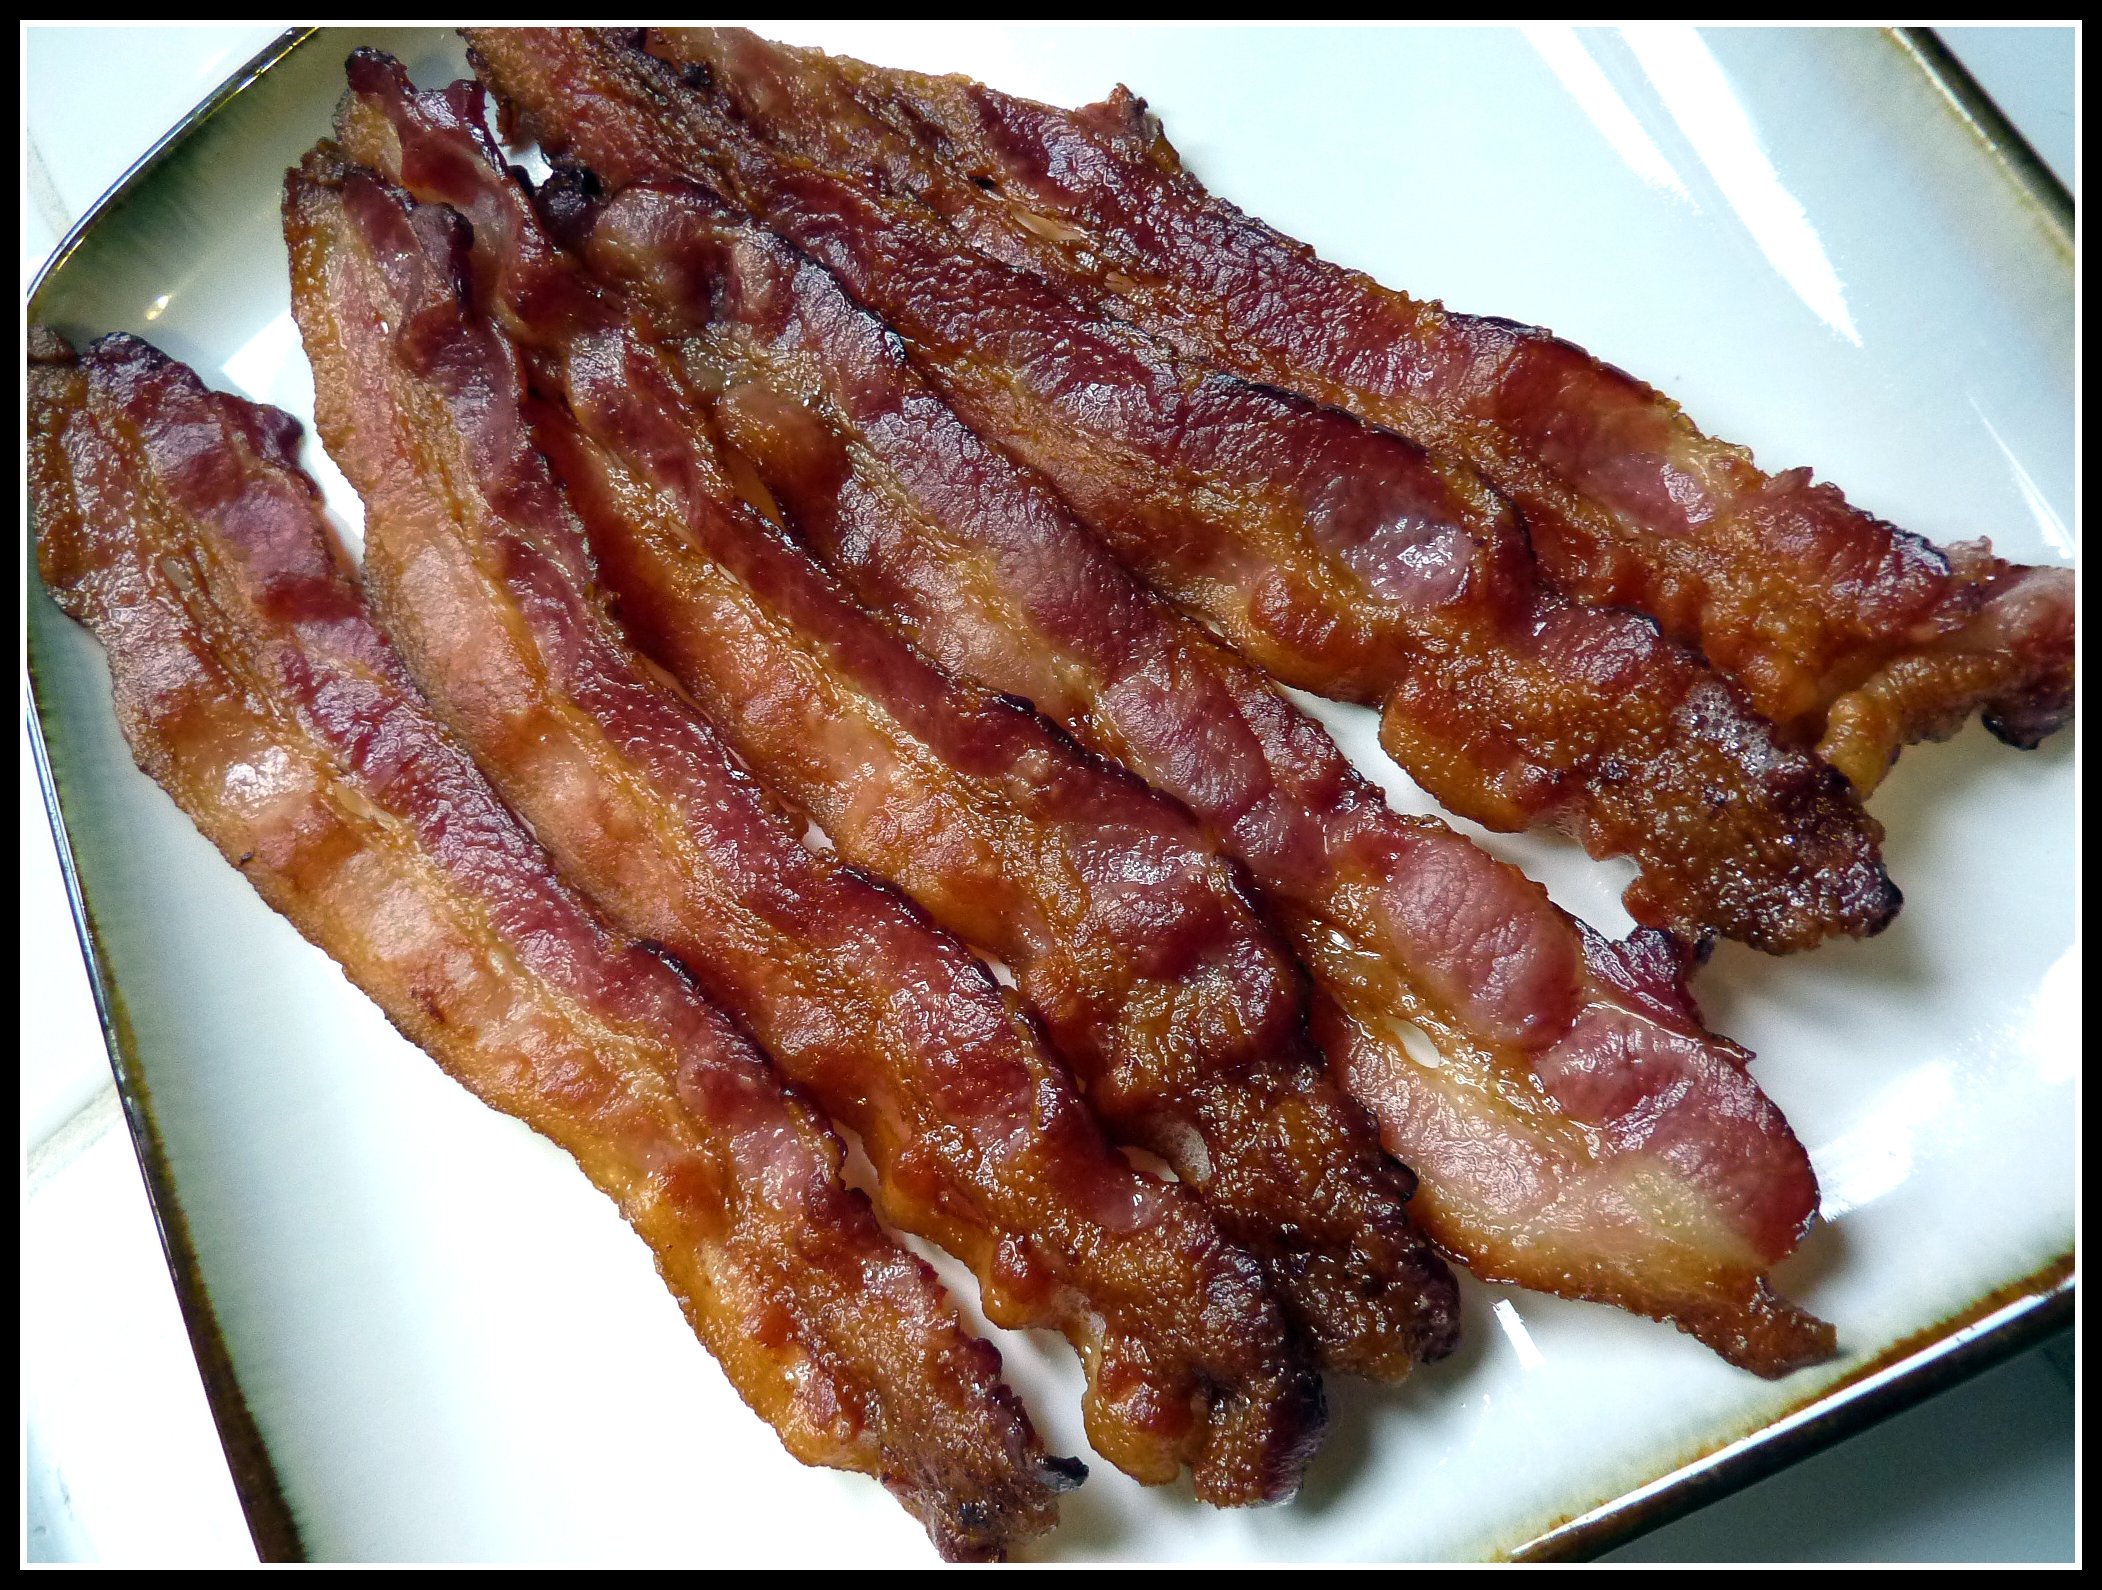 Image result for bacon